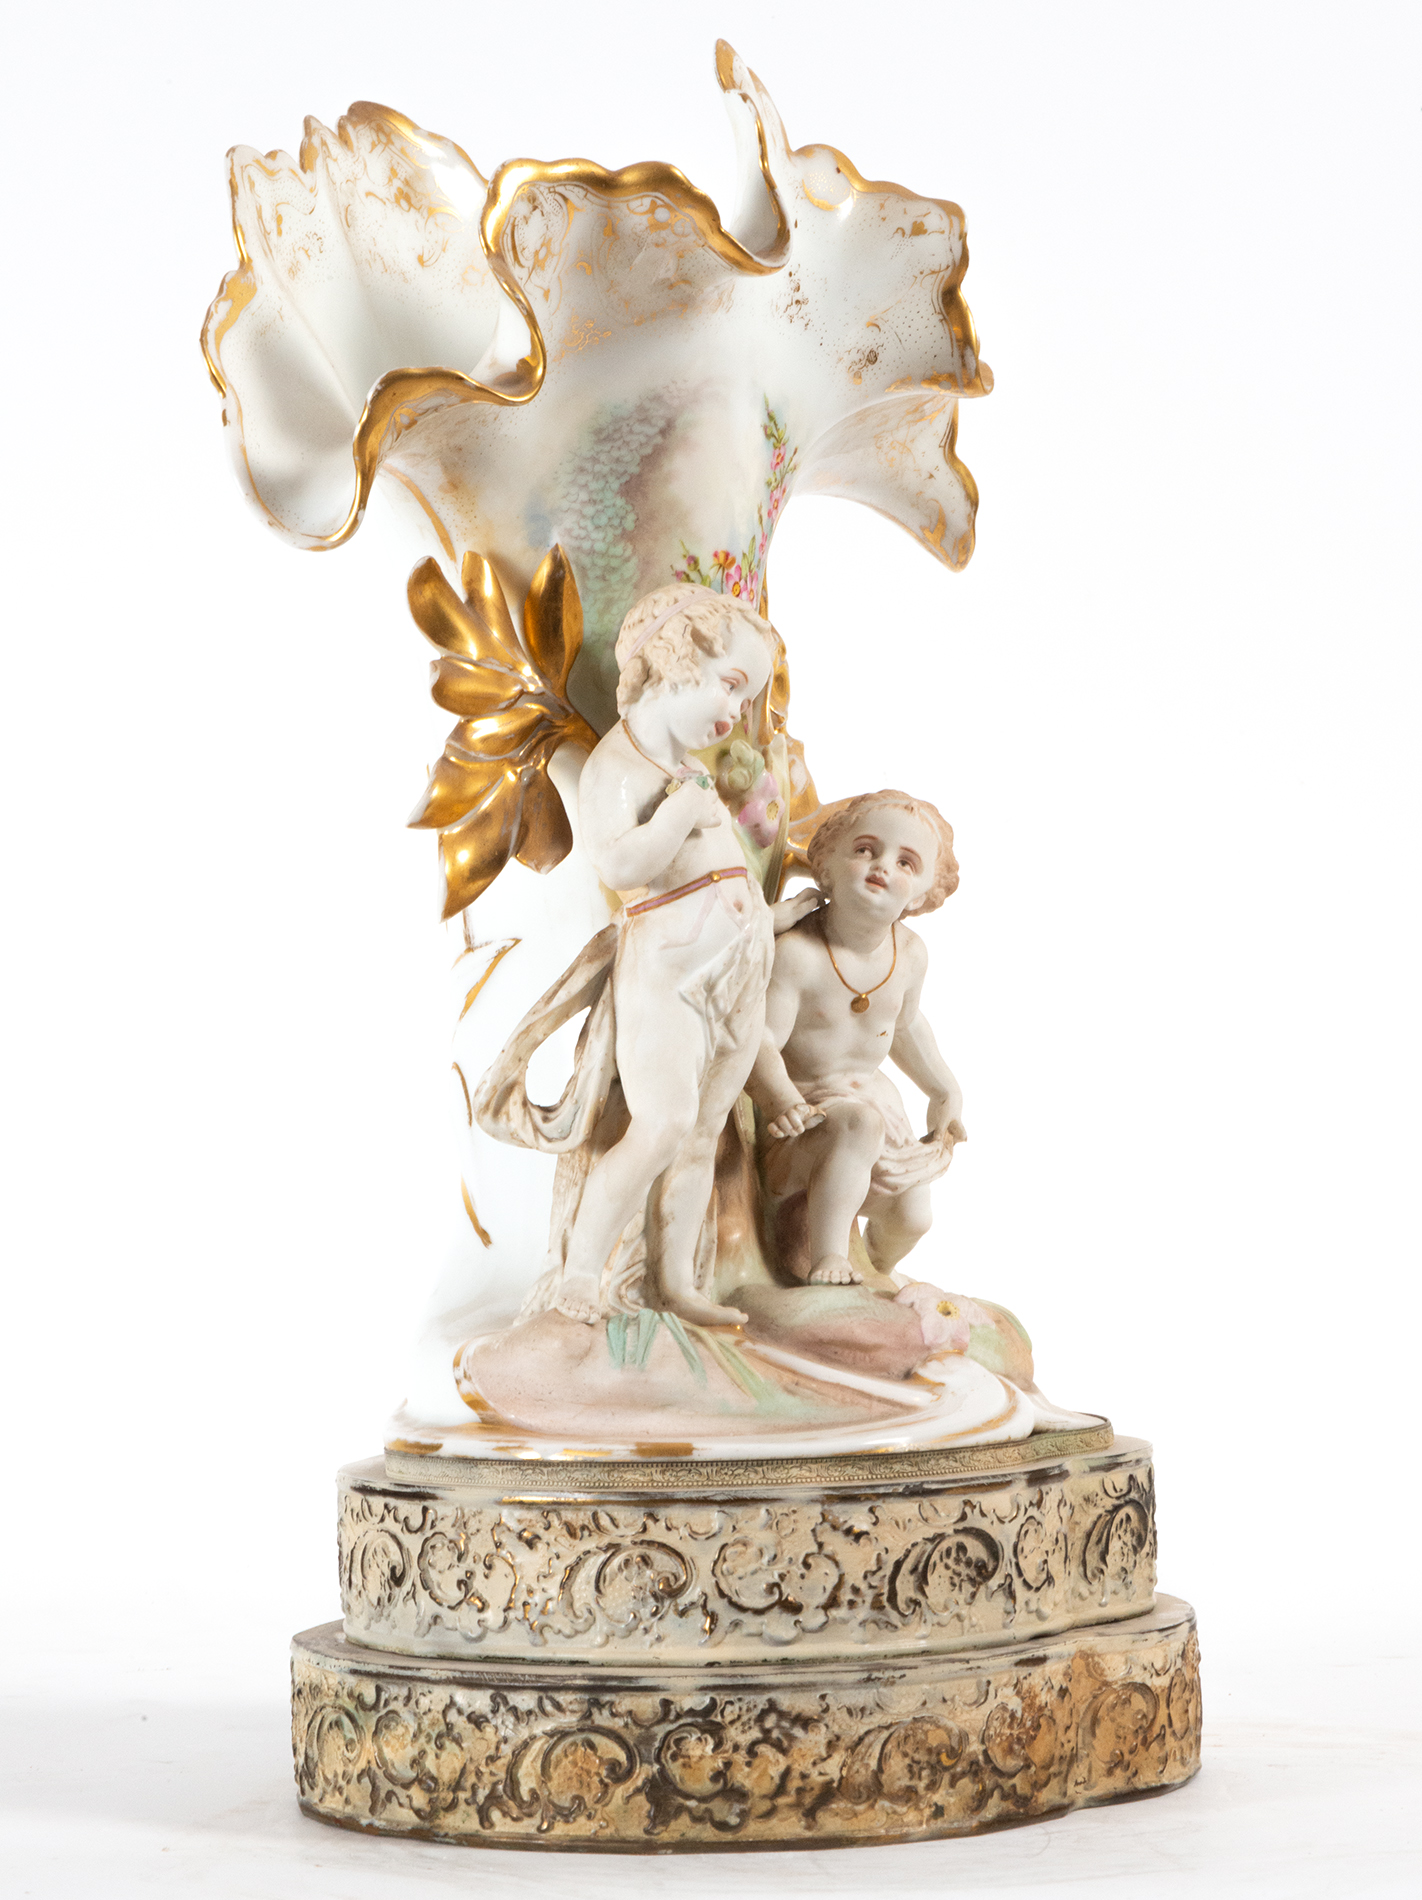 Pair of Vases with Little Shepherds in glazed biscuit porcelain, 19th century - Image 8 of 8